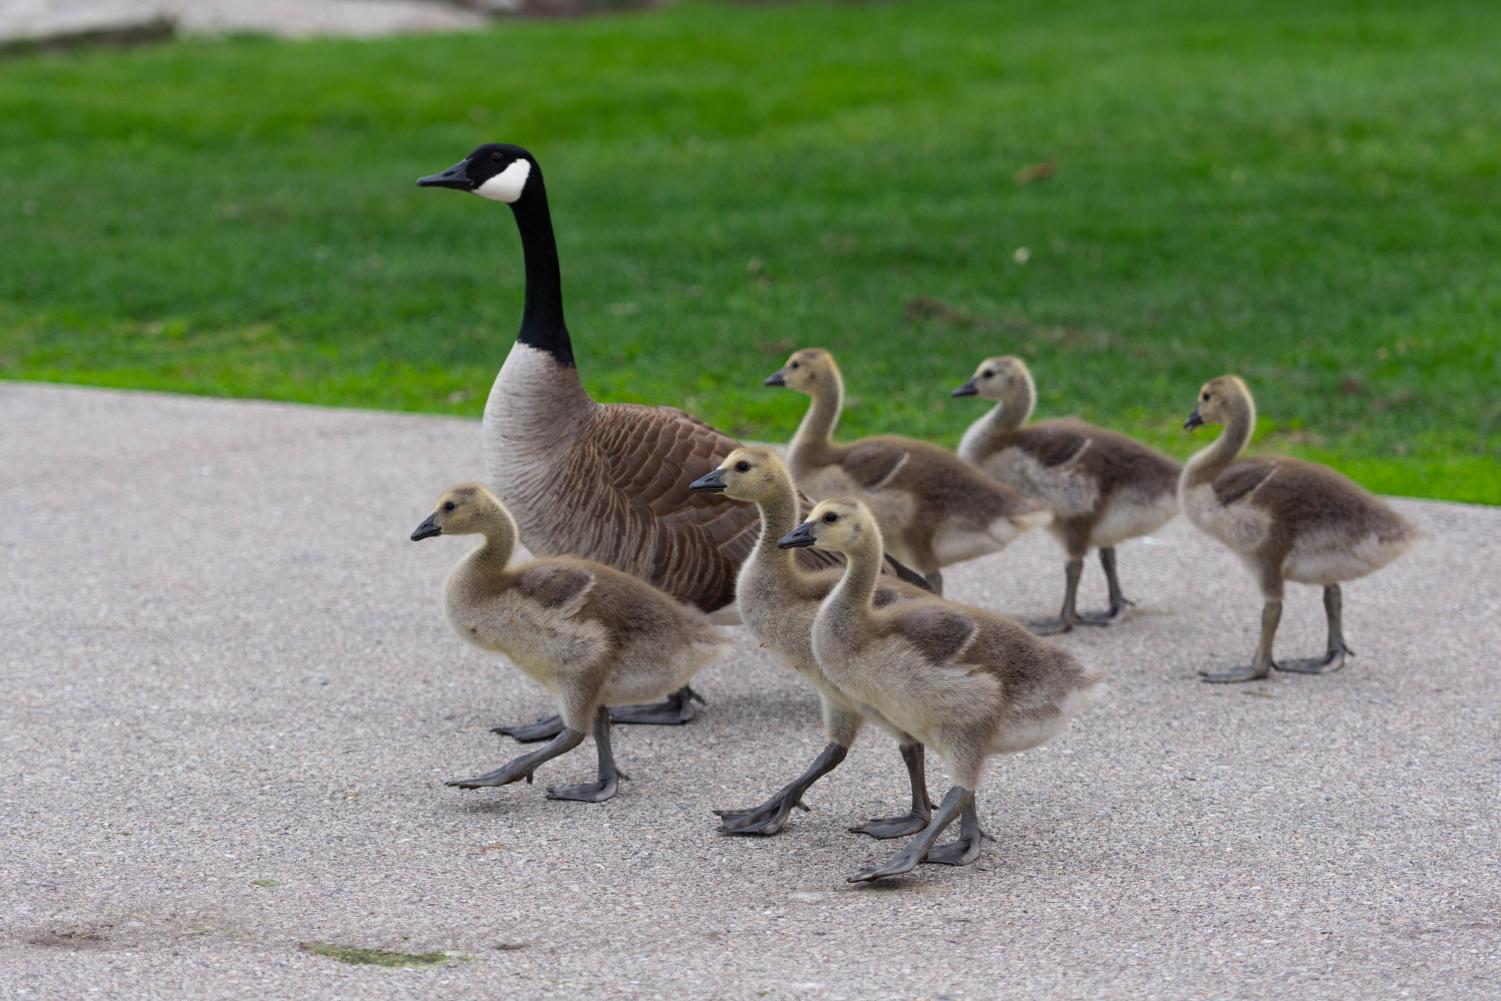 A goose and a group of goslings walk together on pavement.